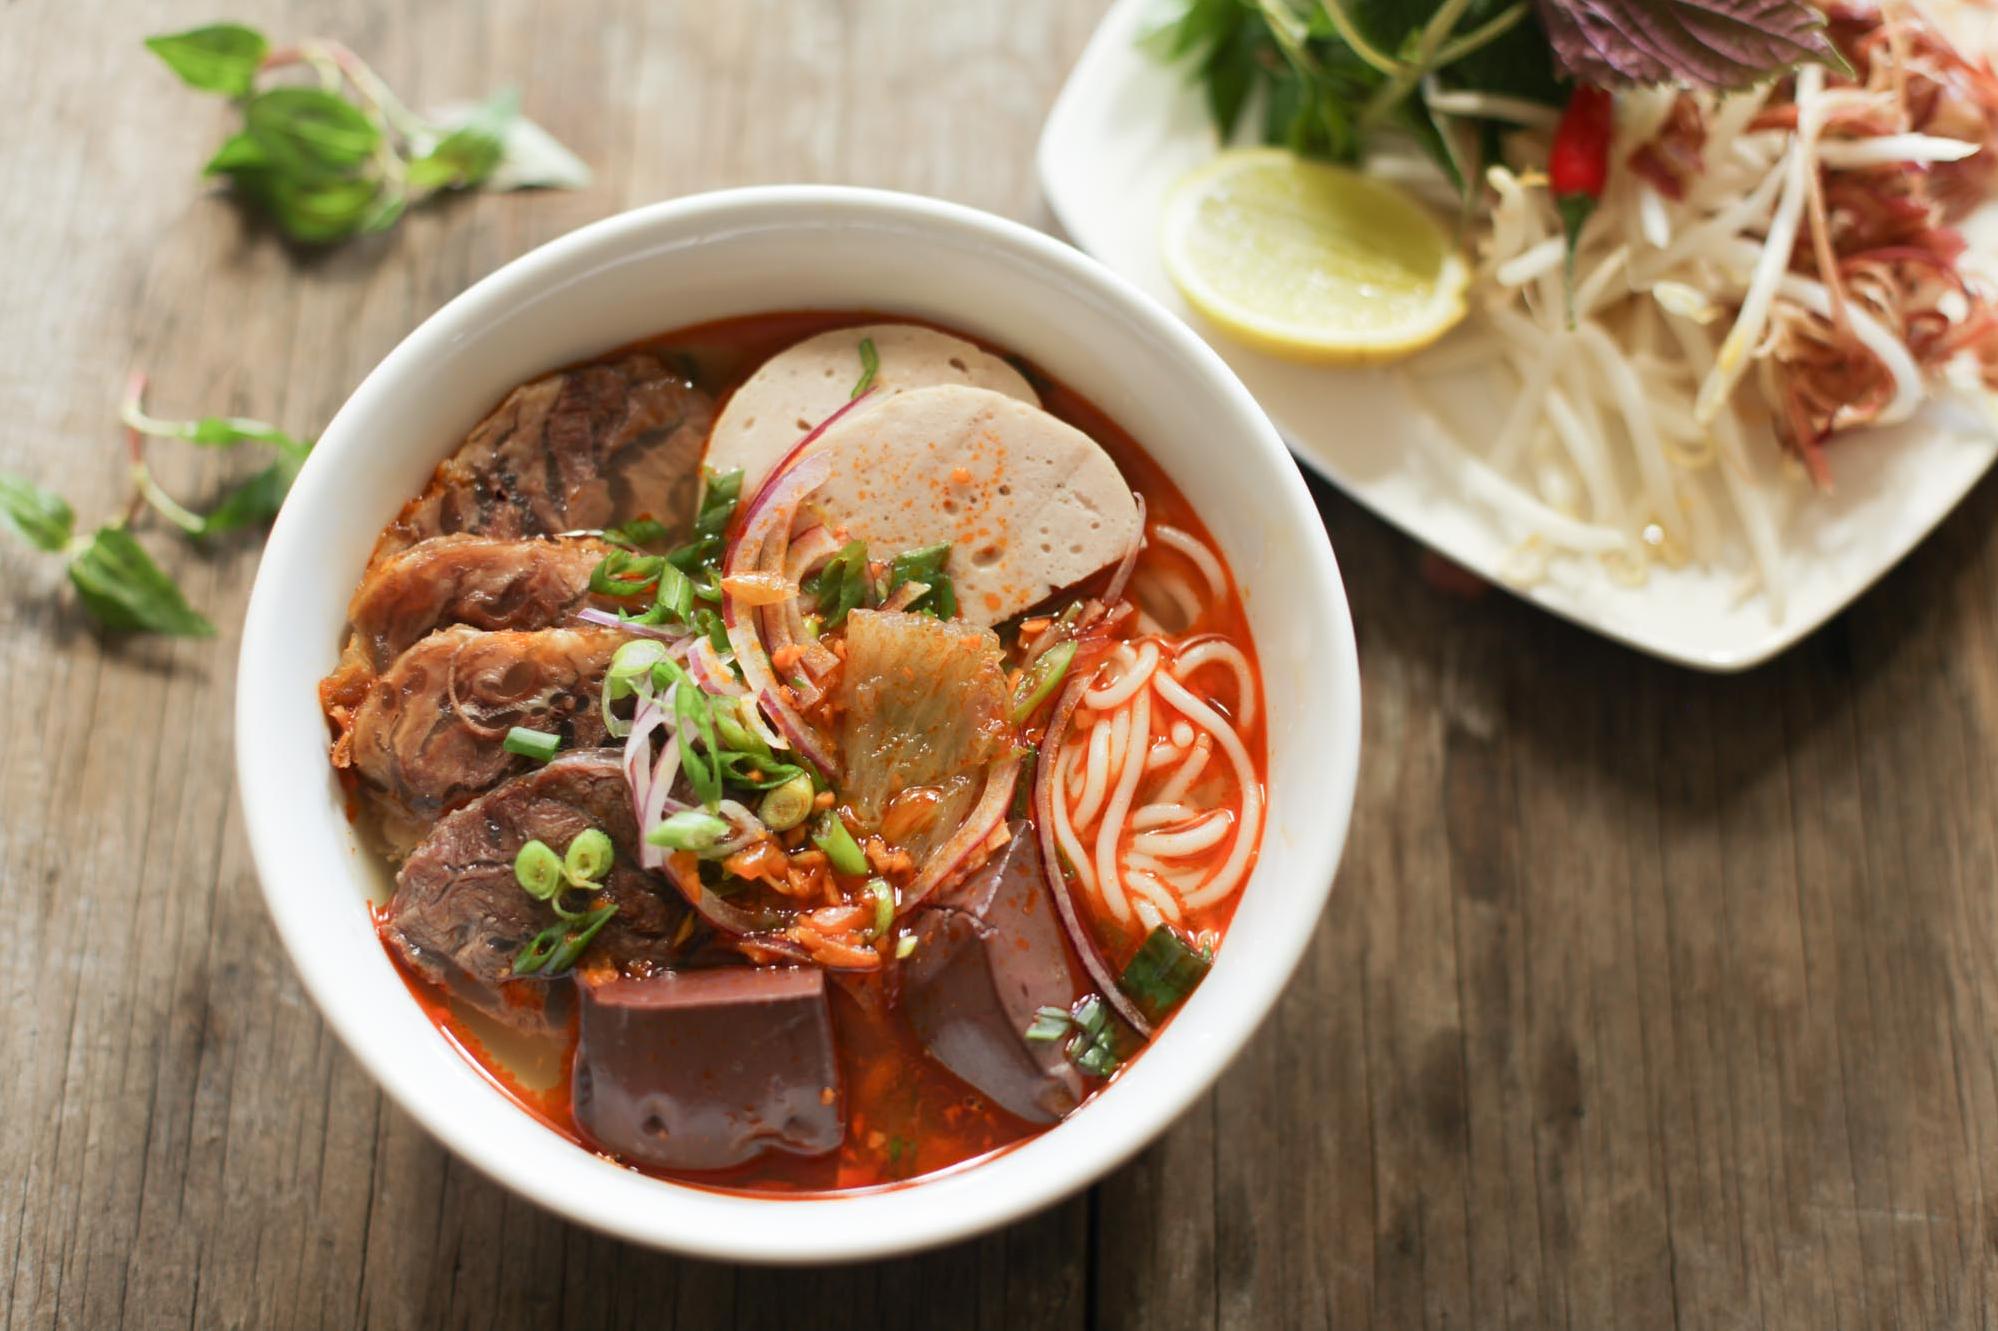  Add a pop of color and crunch with a side of fresh herbs to accompany your Bun Bo Hue.